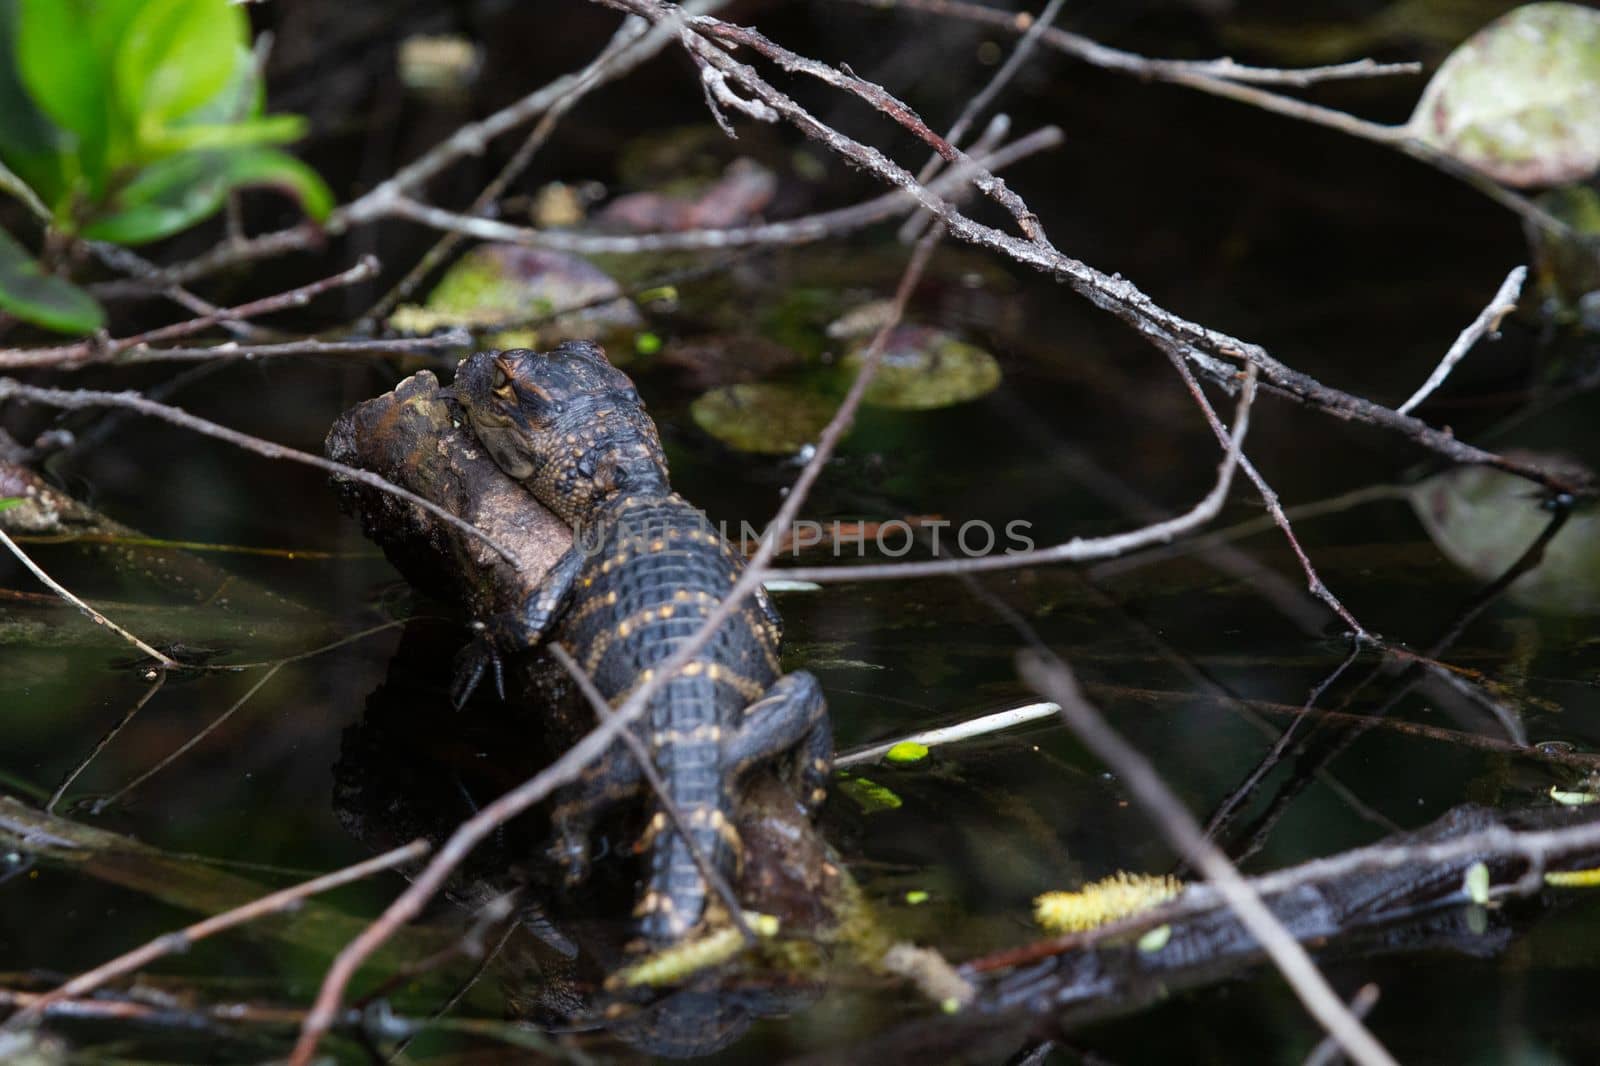 A young American alligator hiding between plants and sleeping by Granchinho